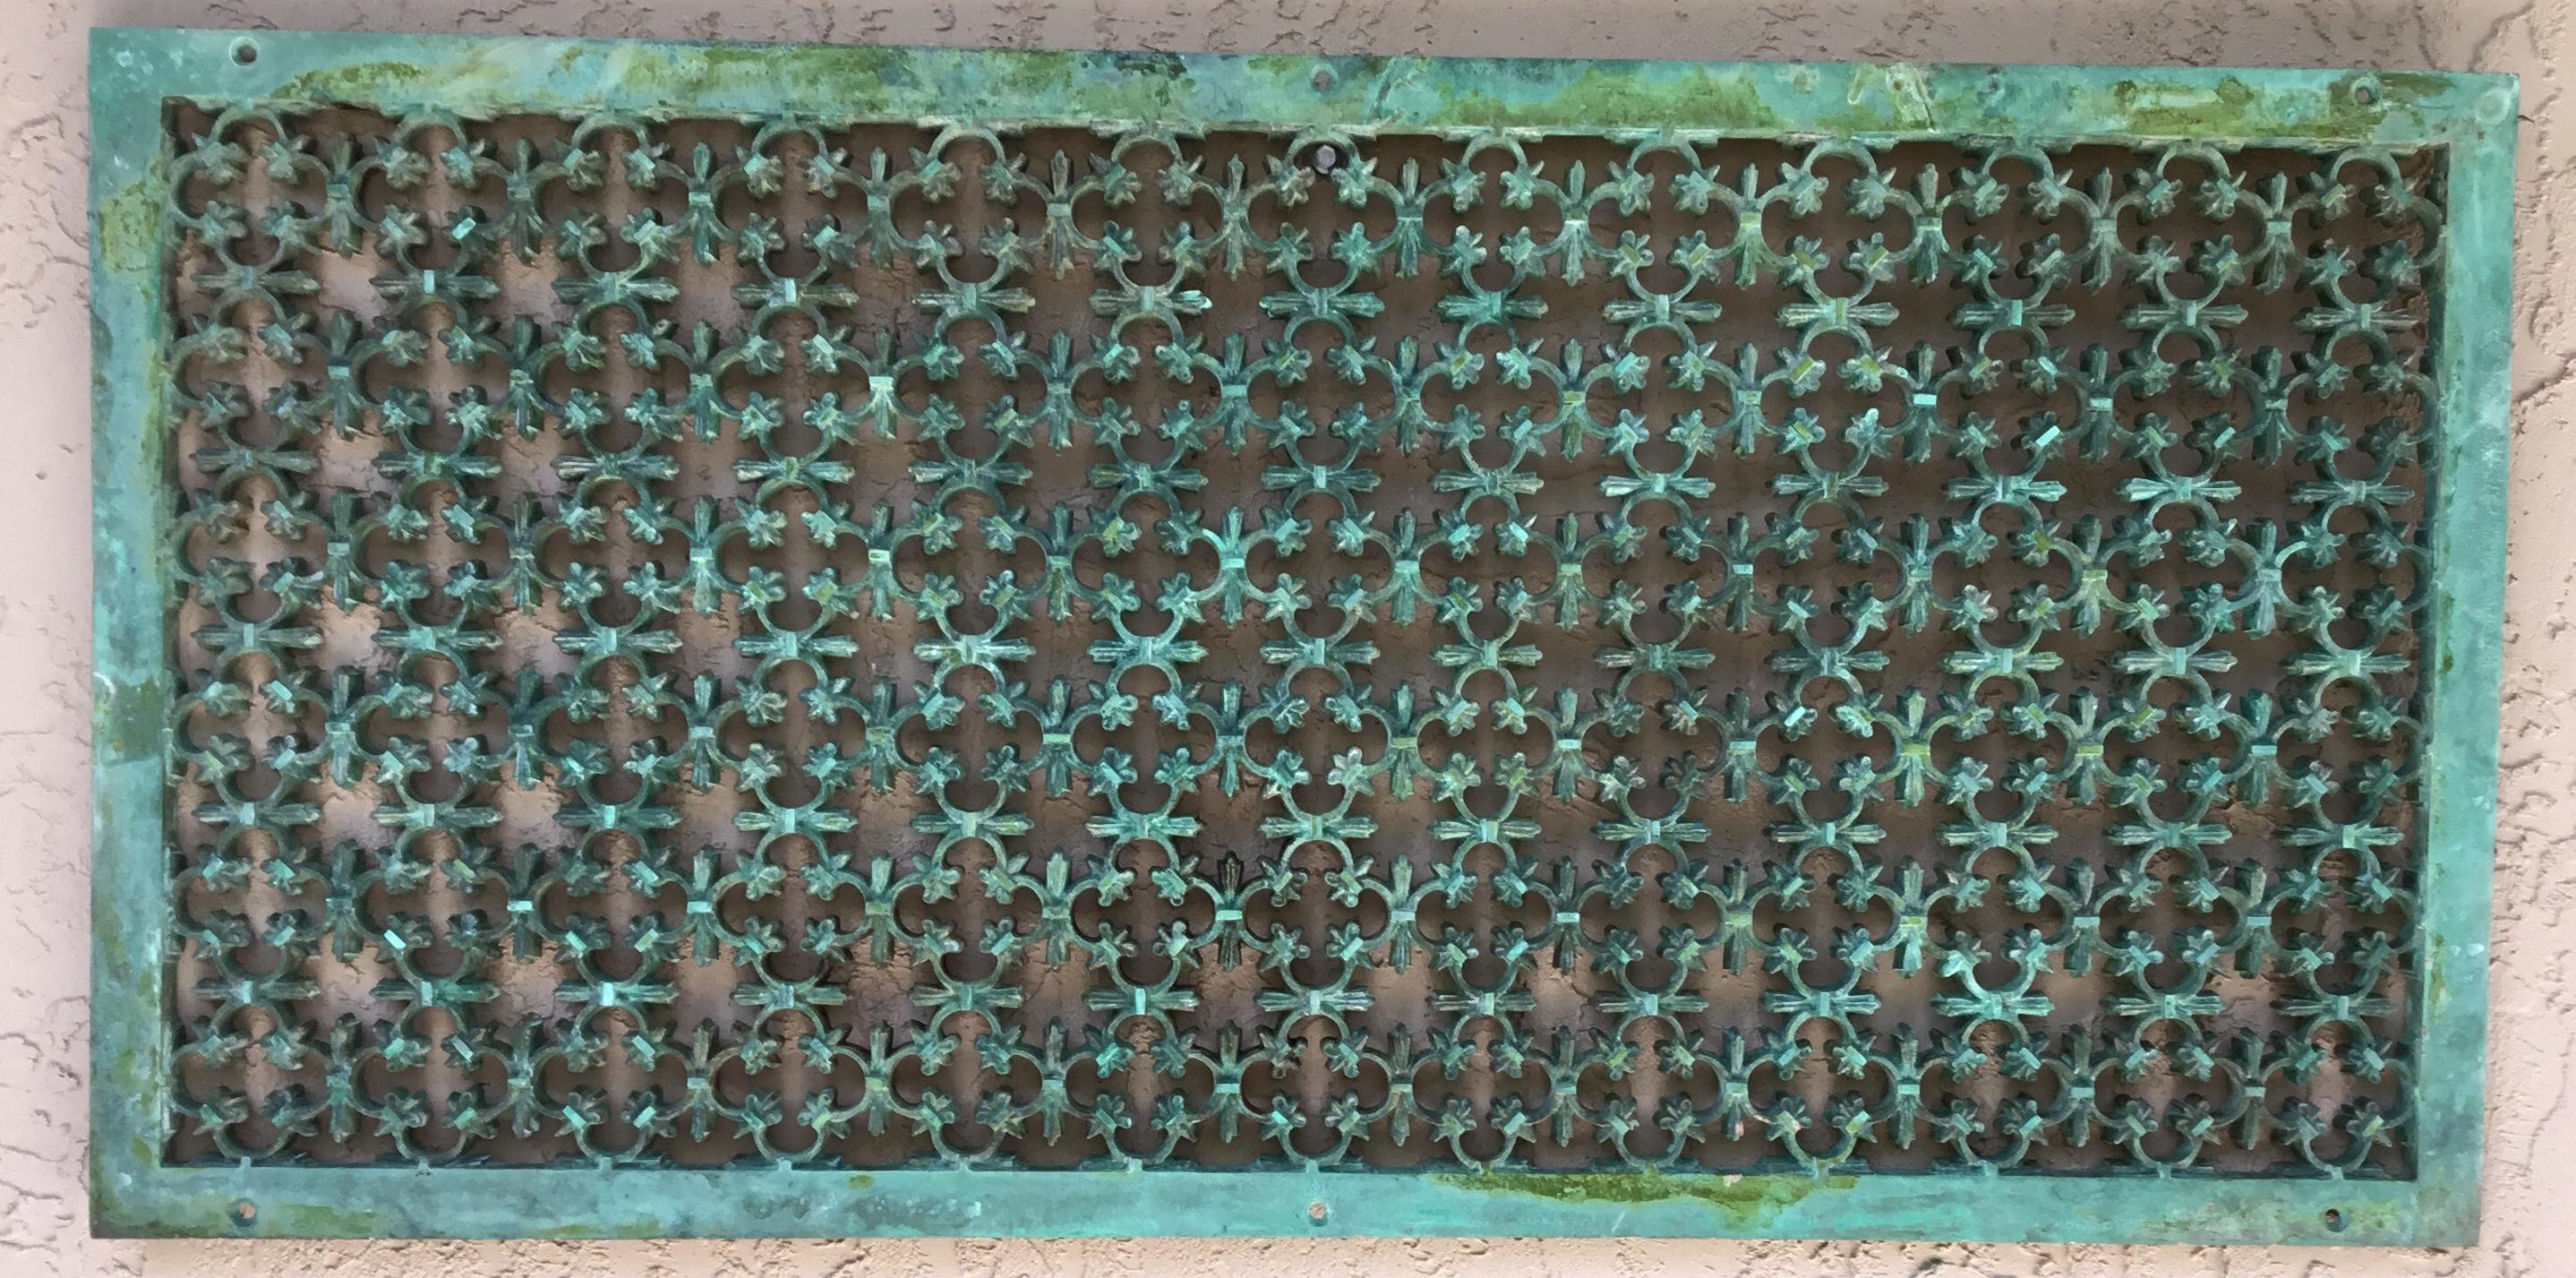 One of a kind decorative screen made of solid copper, beautifully oxidize green color. Multi purpose use indoor or outdoor will not rust
Total weight 26 pound.